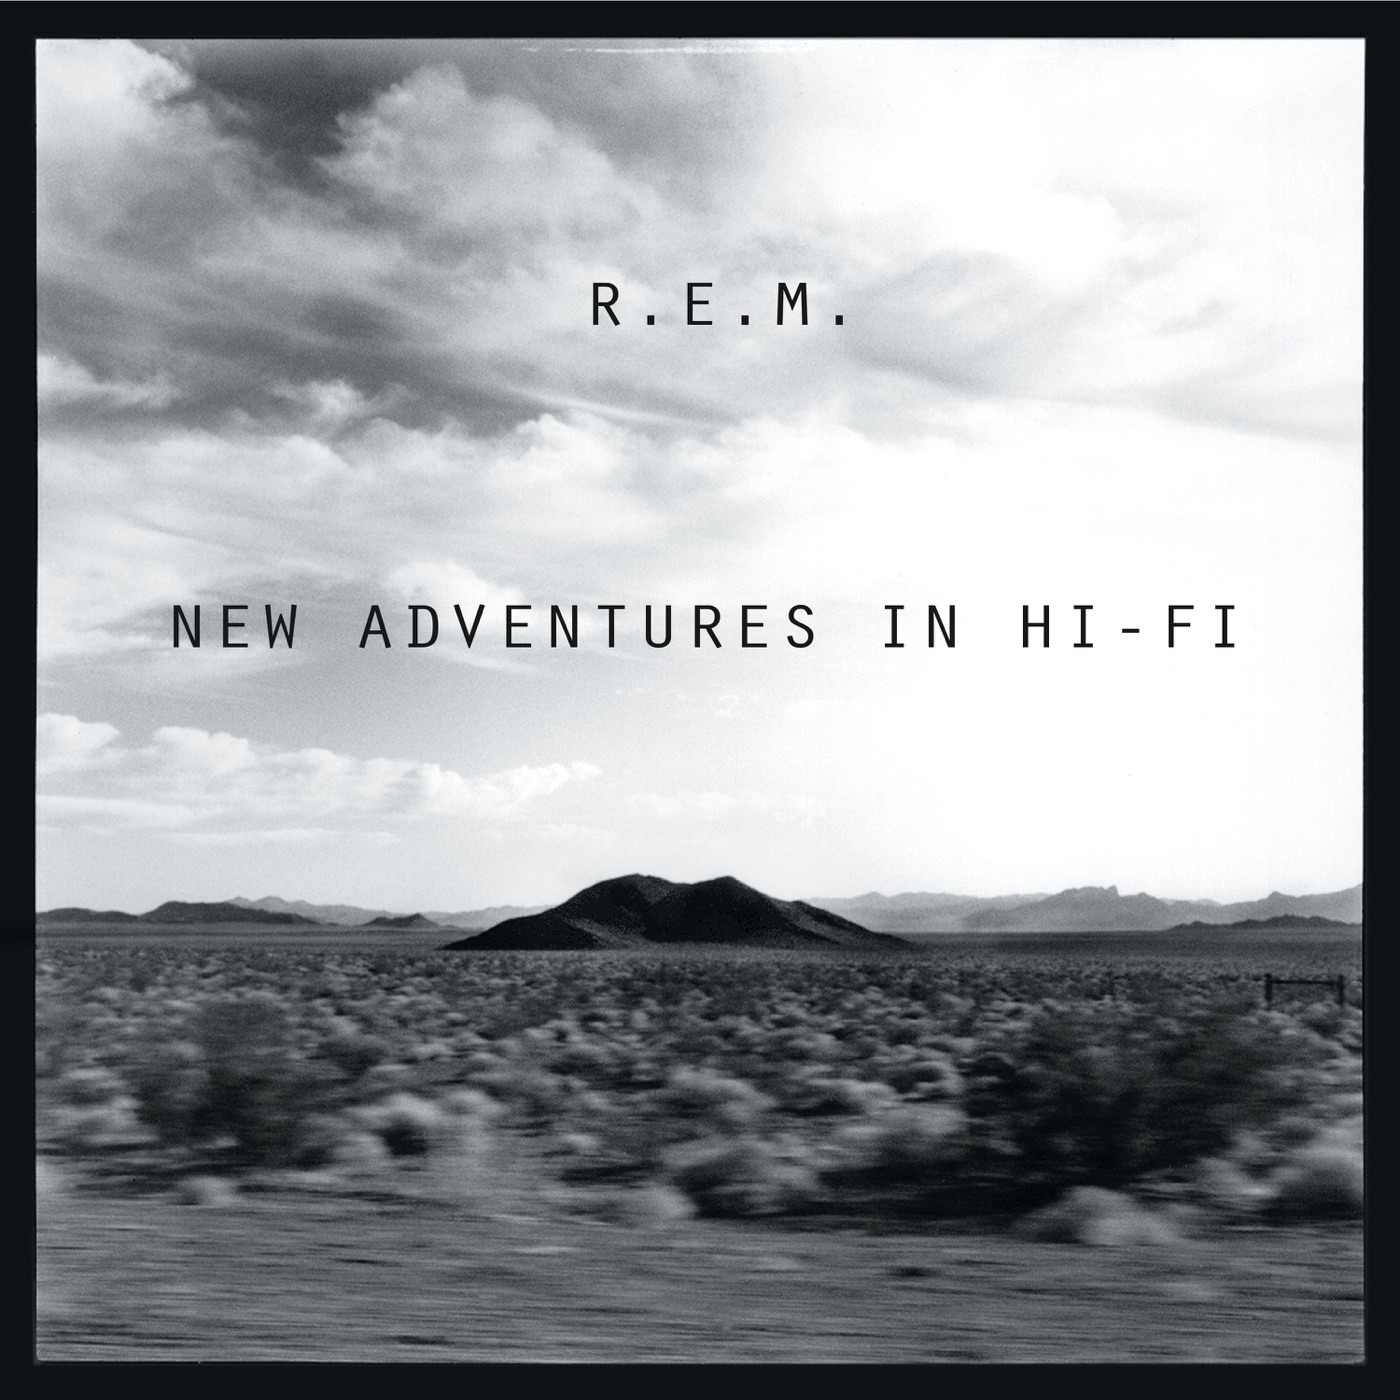 New Adventures In Hi-Fi by R.E.M.